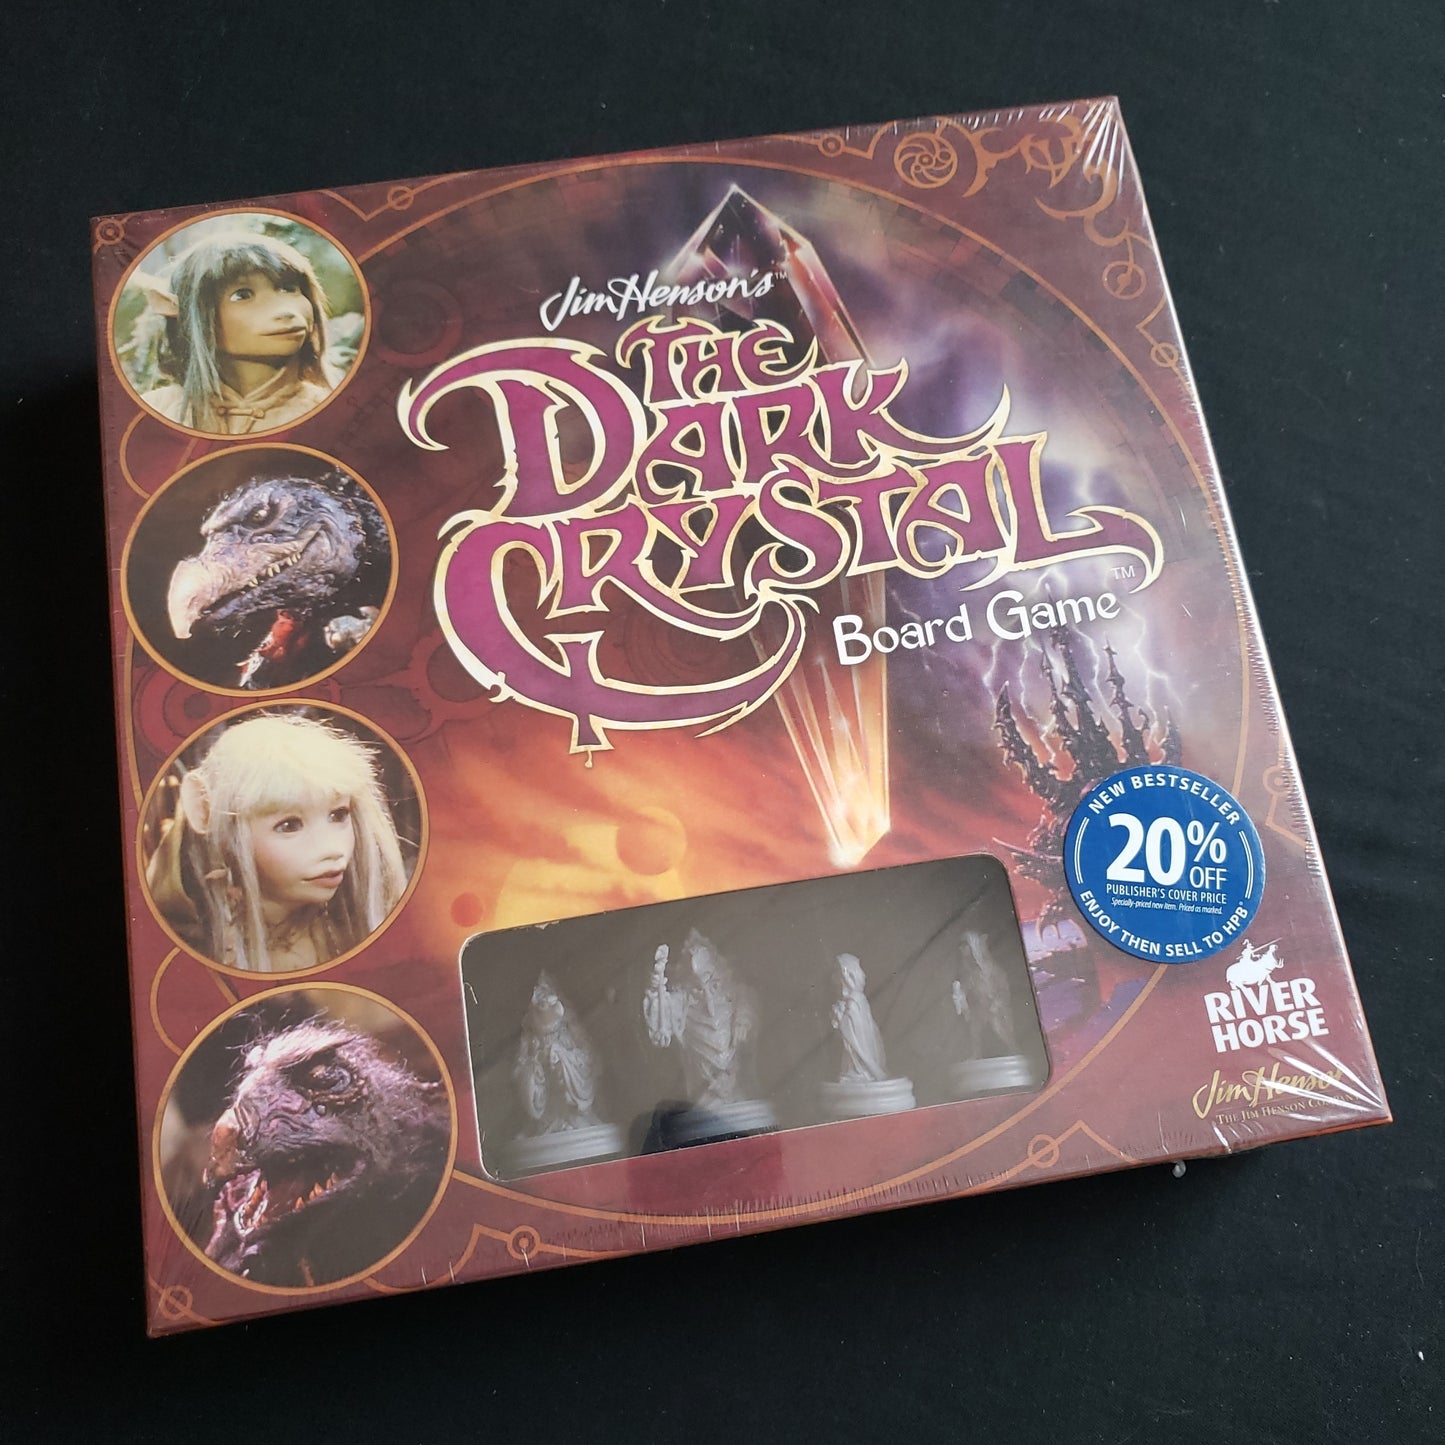 Image shows the front cover of the box of the Dark Crystal board game